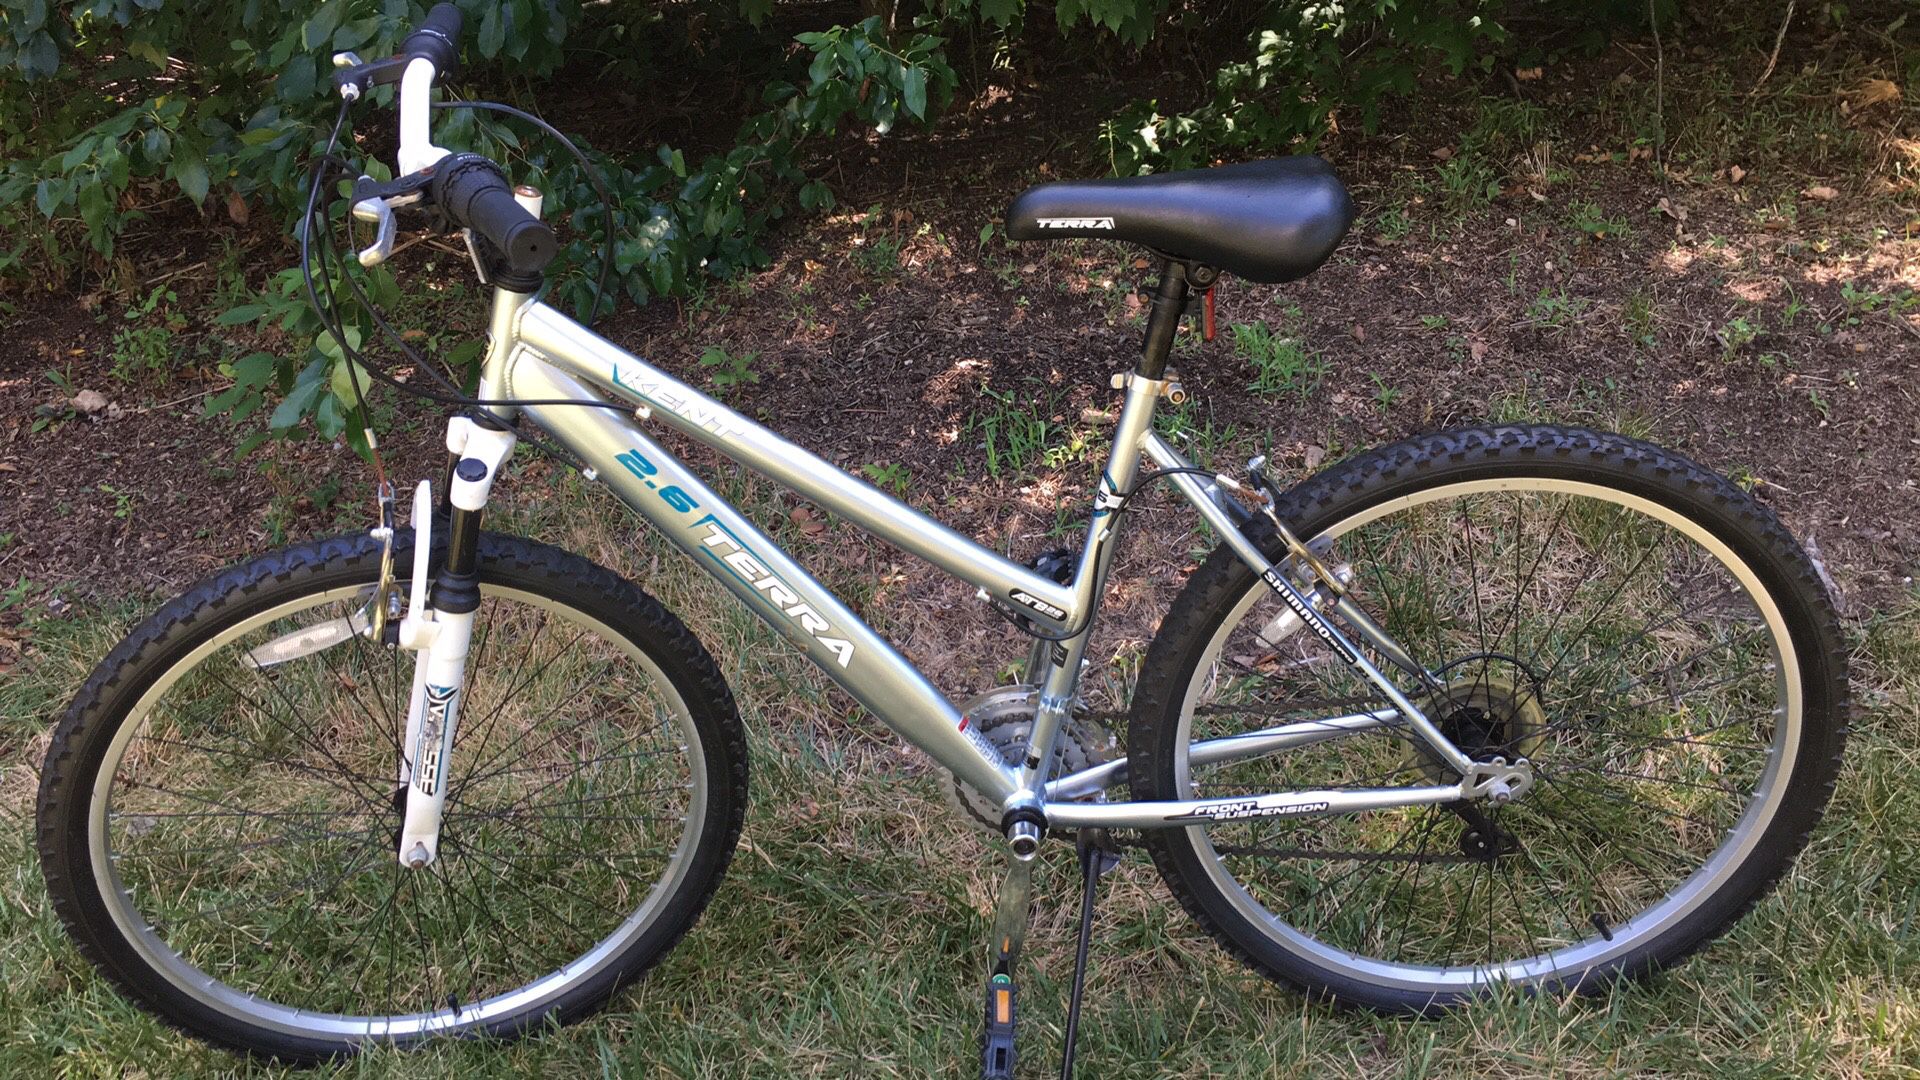 26 inches mountain bike like new, tuned up and ready to ride